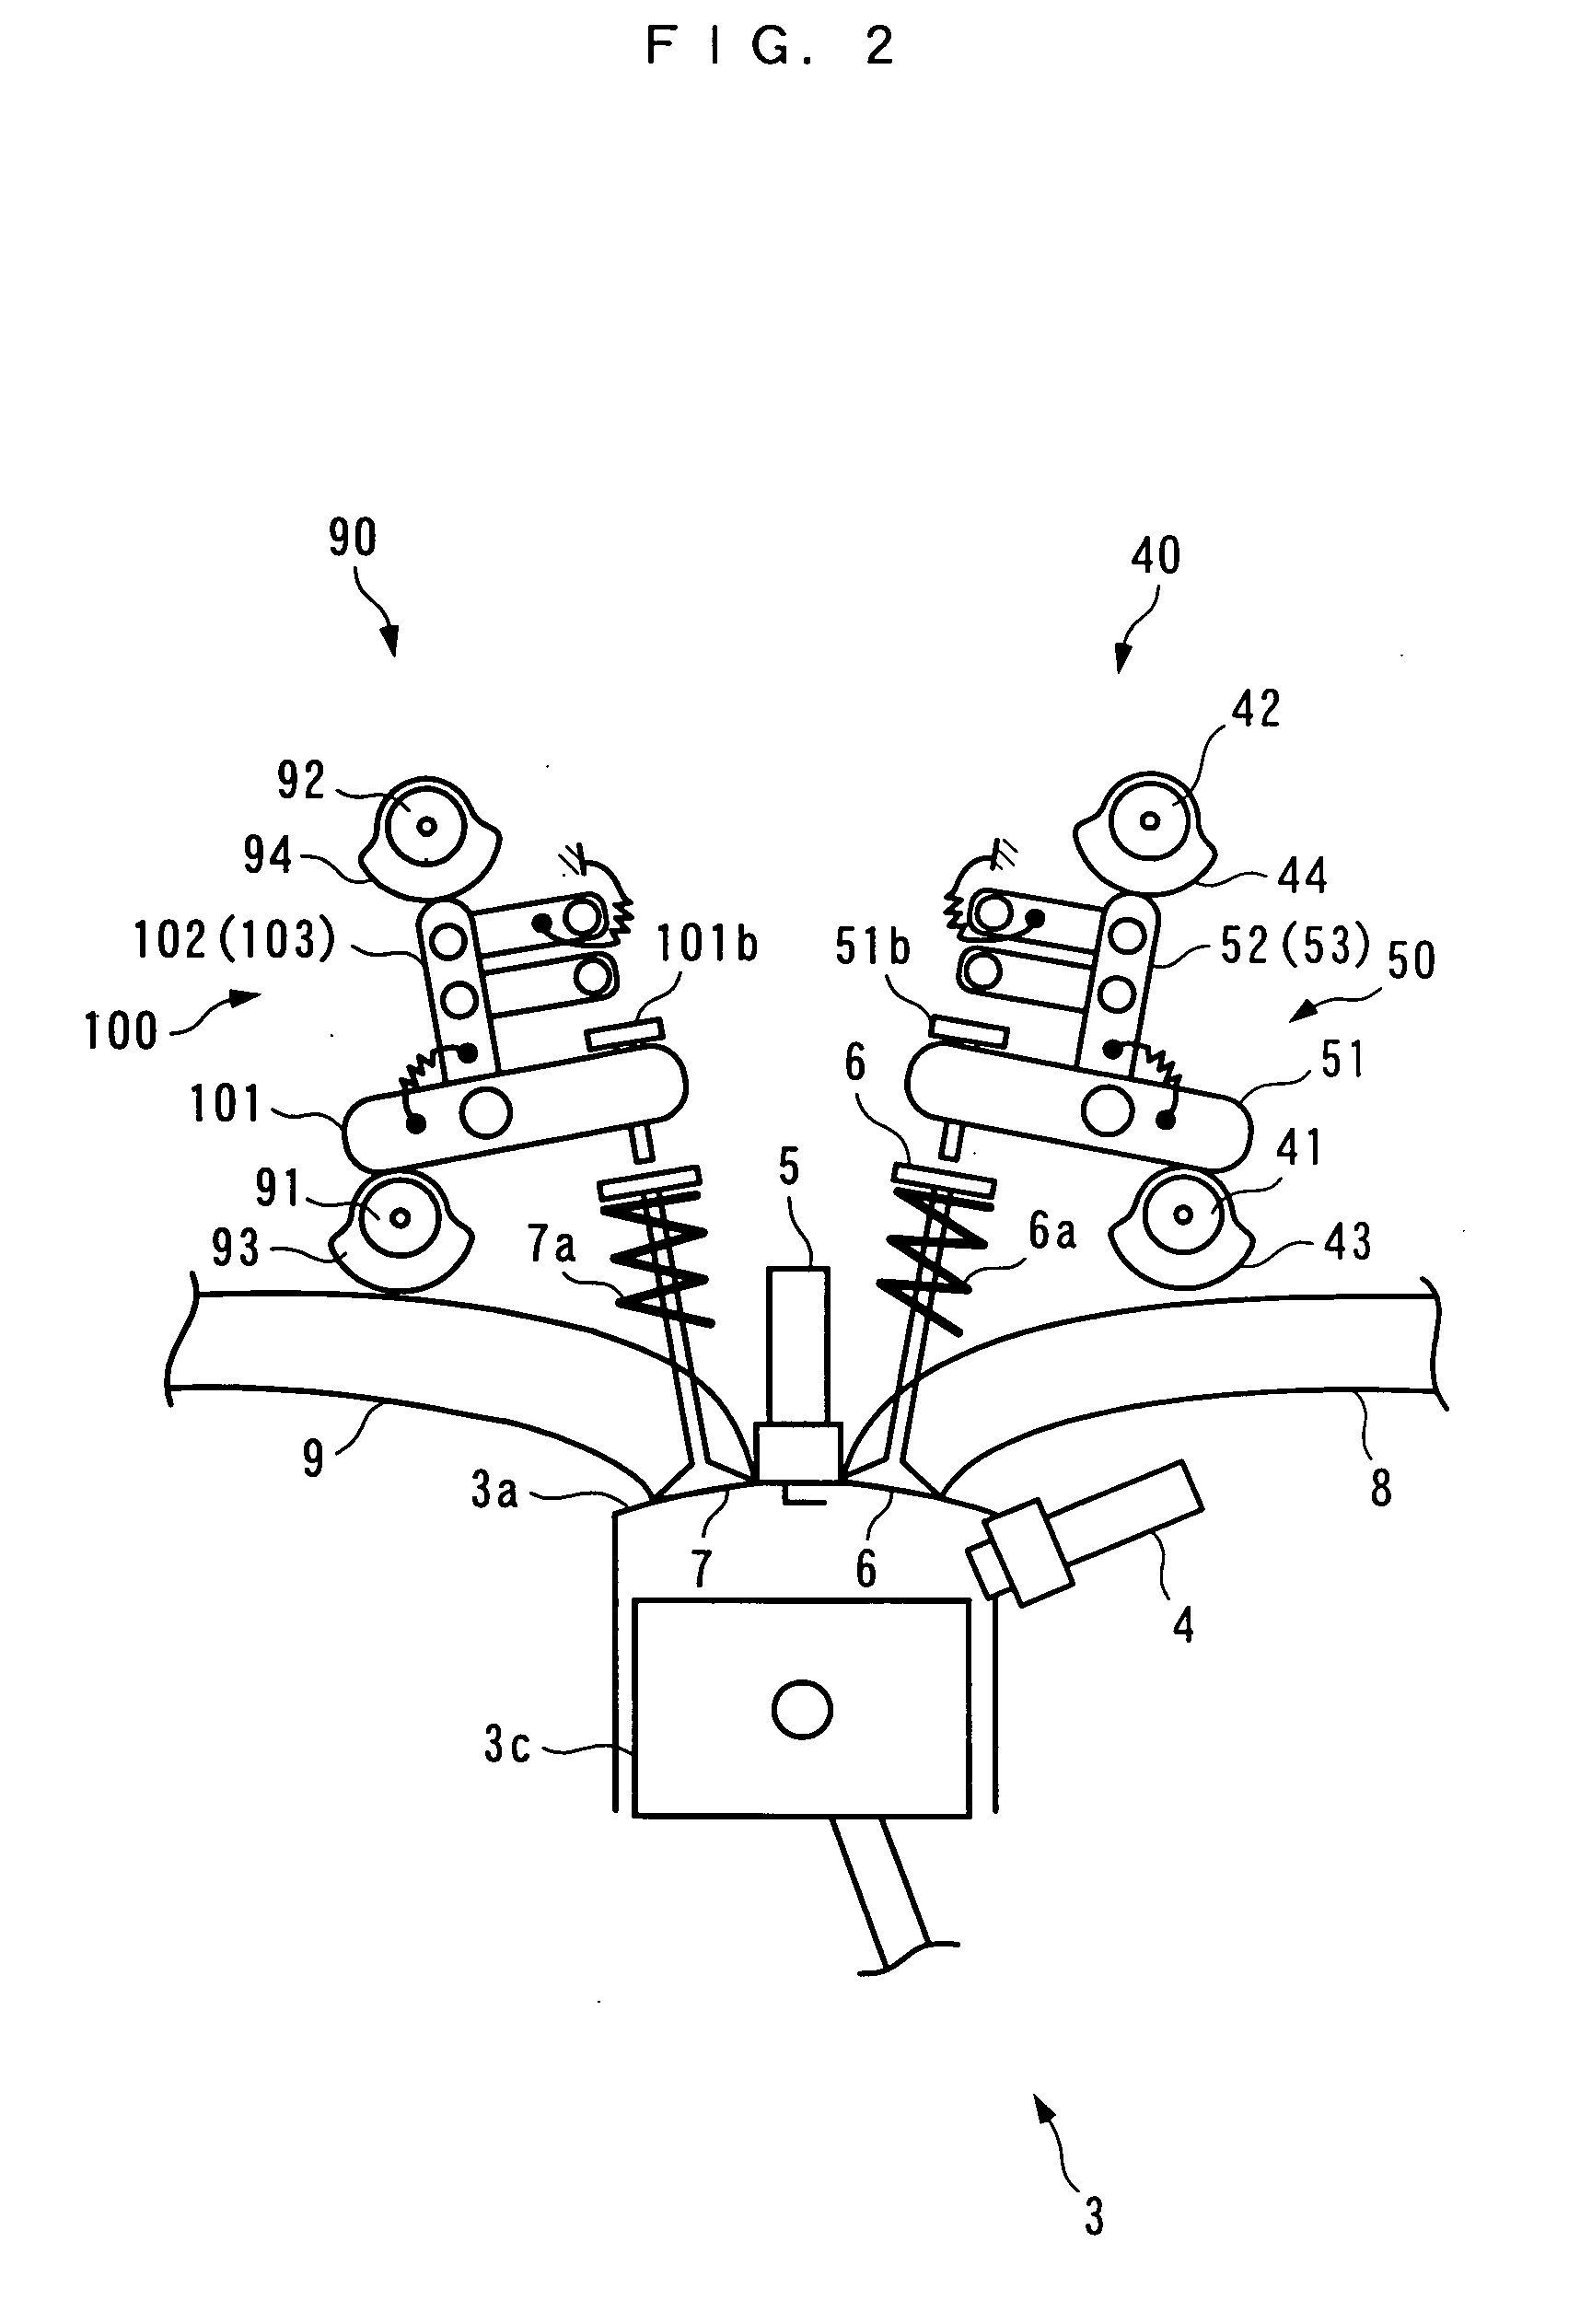 Intake Air Amount Control System for Internal Combustion Engine and Control System